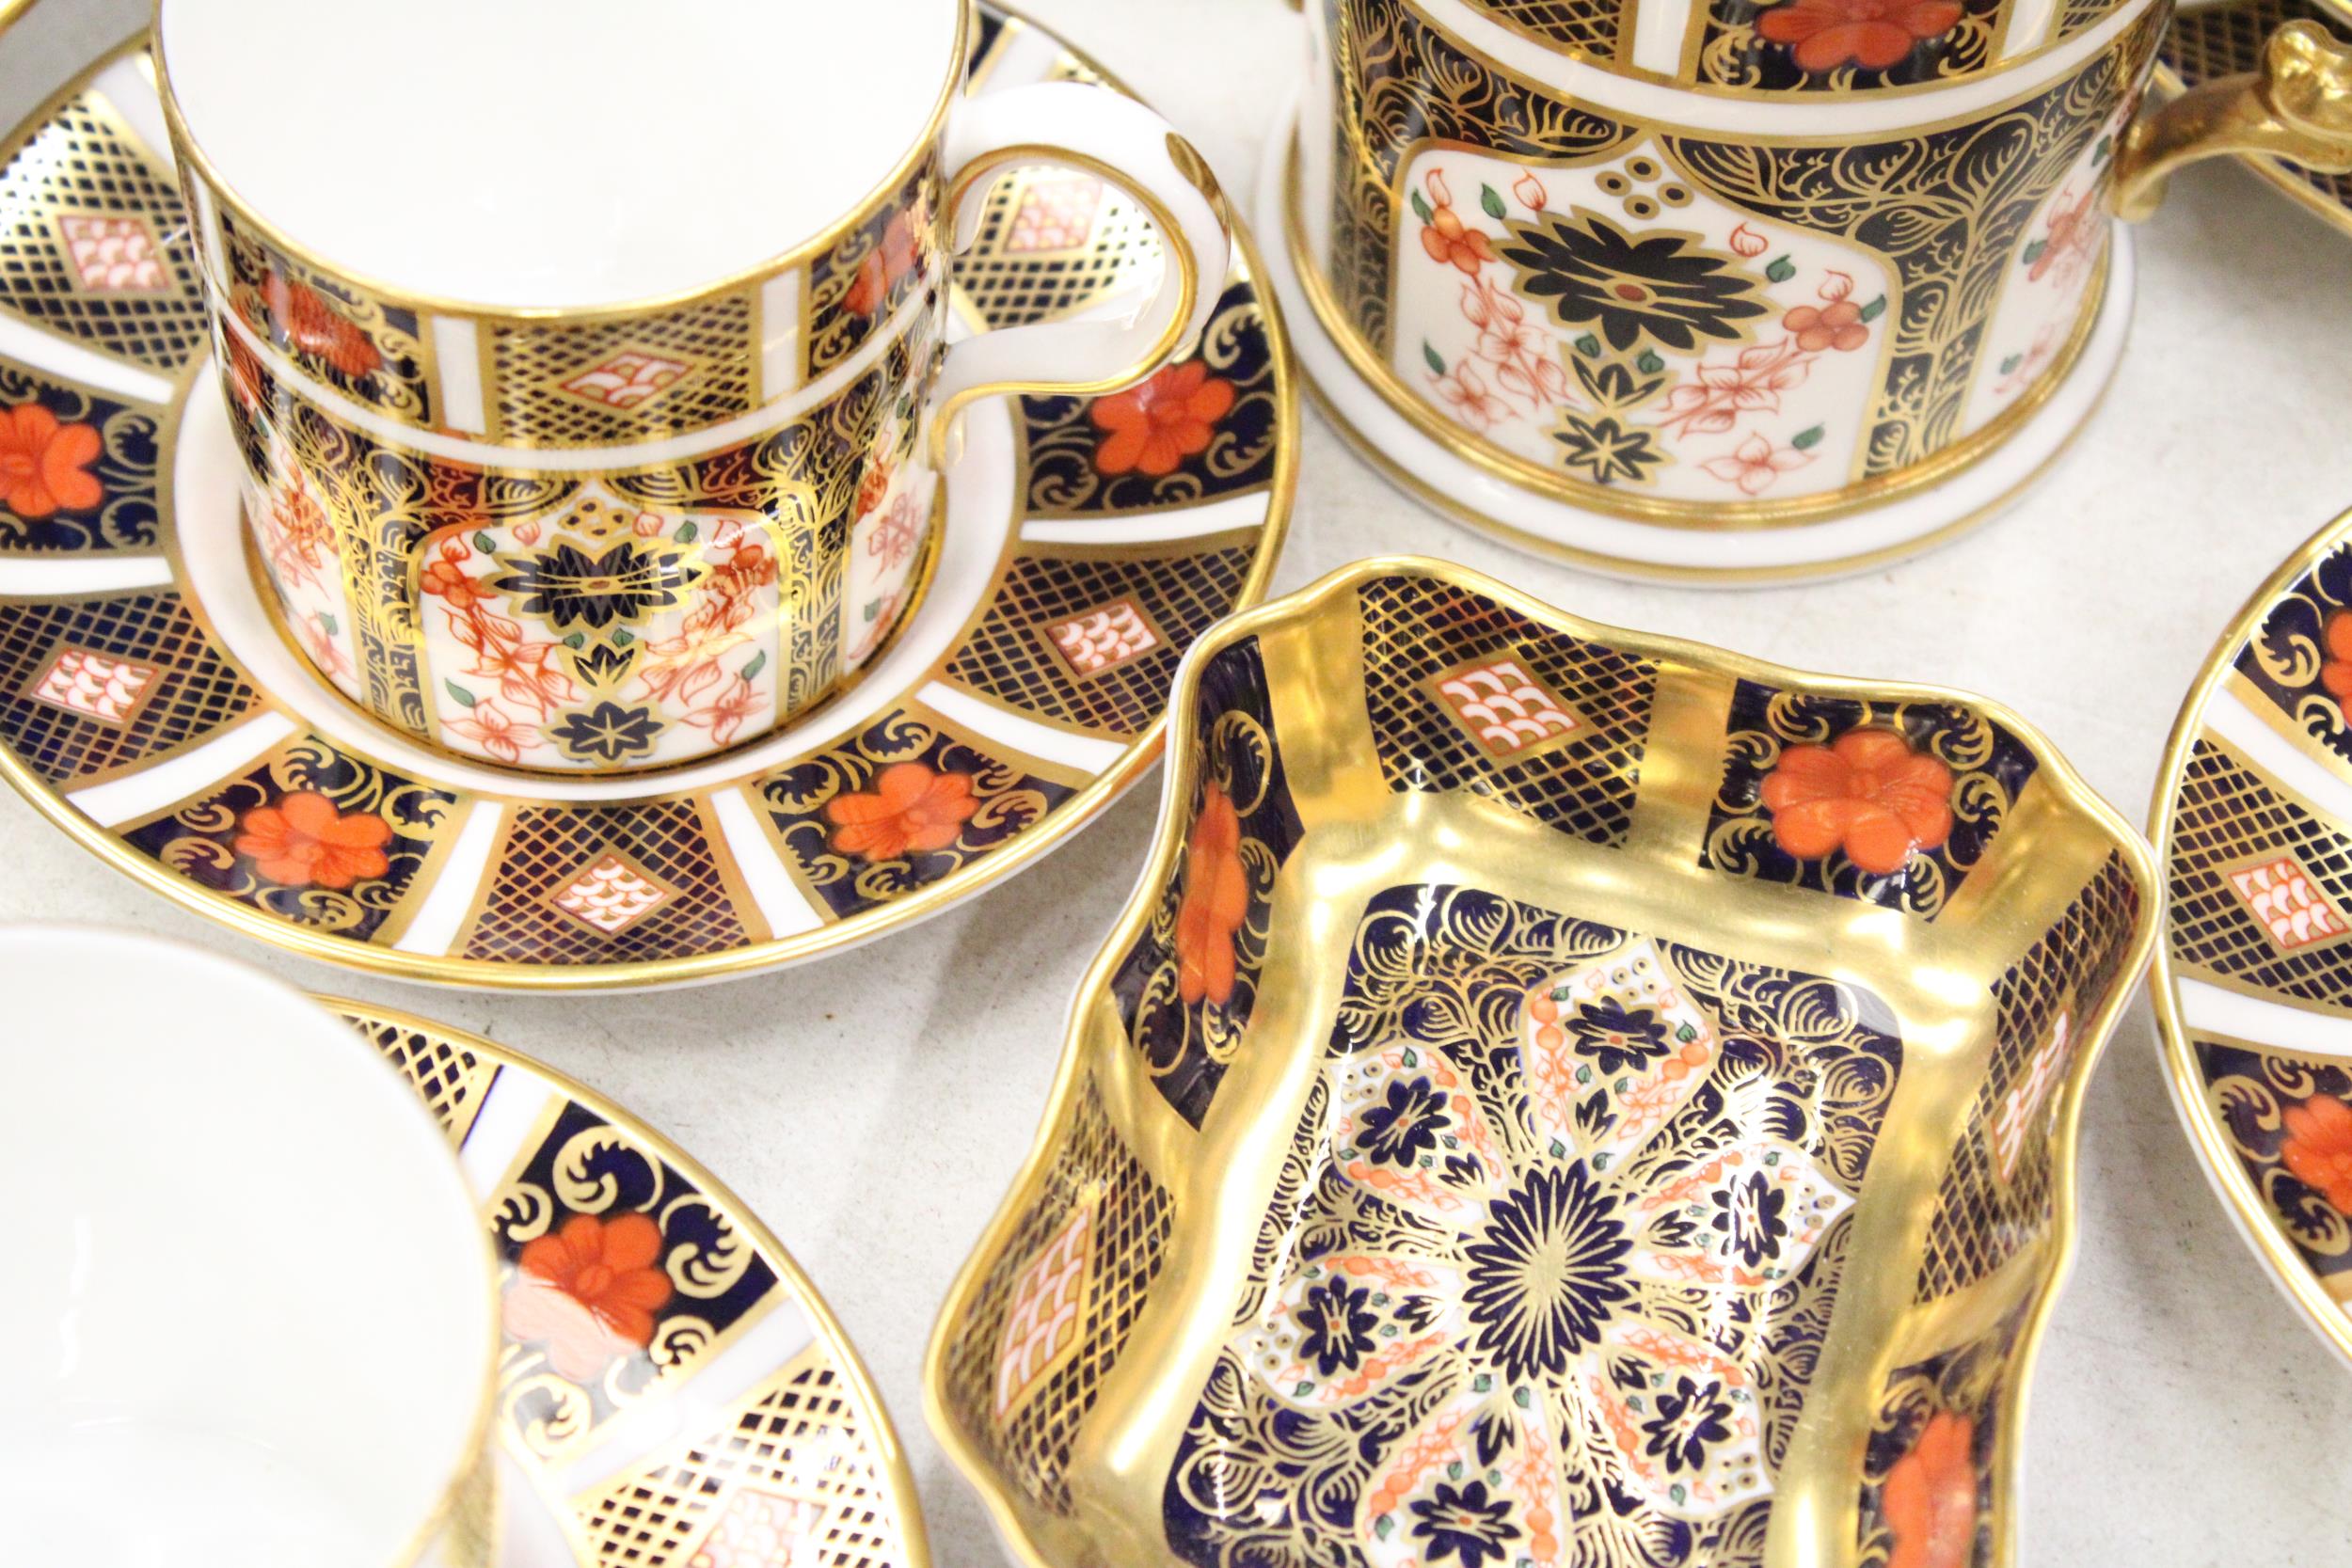 A QUANTITY OF ROYAL CROWN DERBY TO INCLUDE A LOVING CUP , COFFEE CANS AND SAUCERS, TEACUPS AND - Image 5 of 7